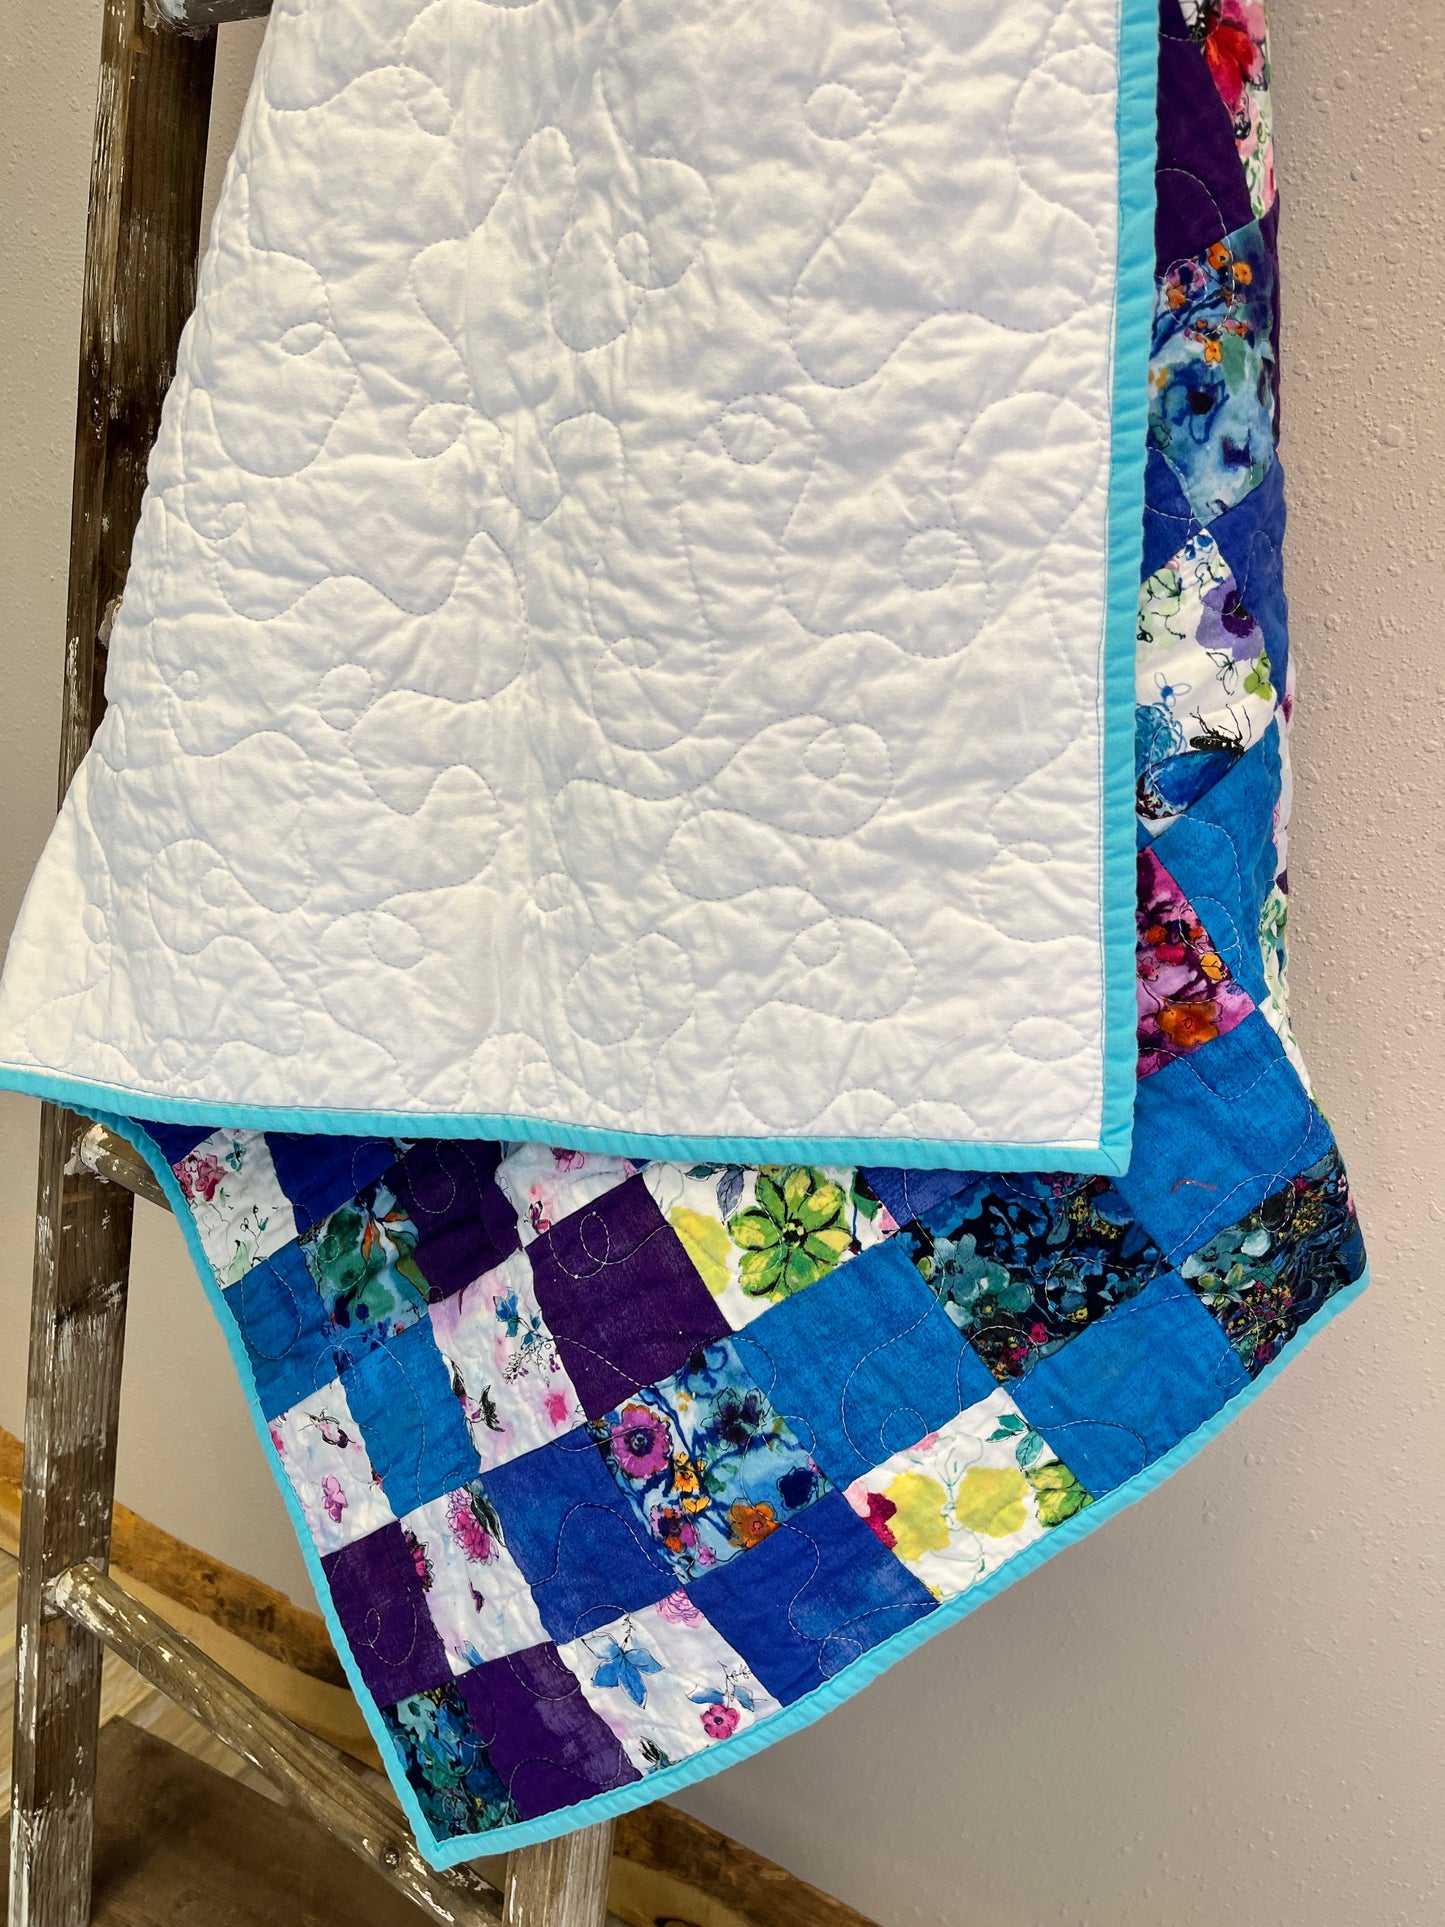 Butterfly Girls Square Patchwork Handmade Baby Quilt - The QuilTea Corner